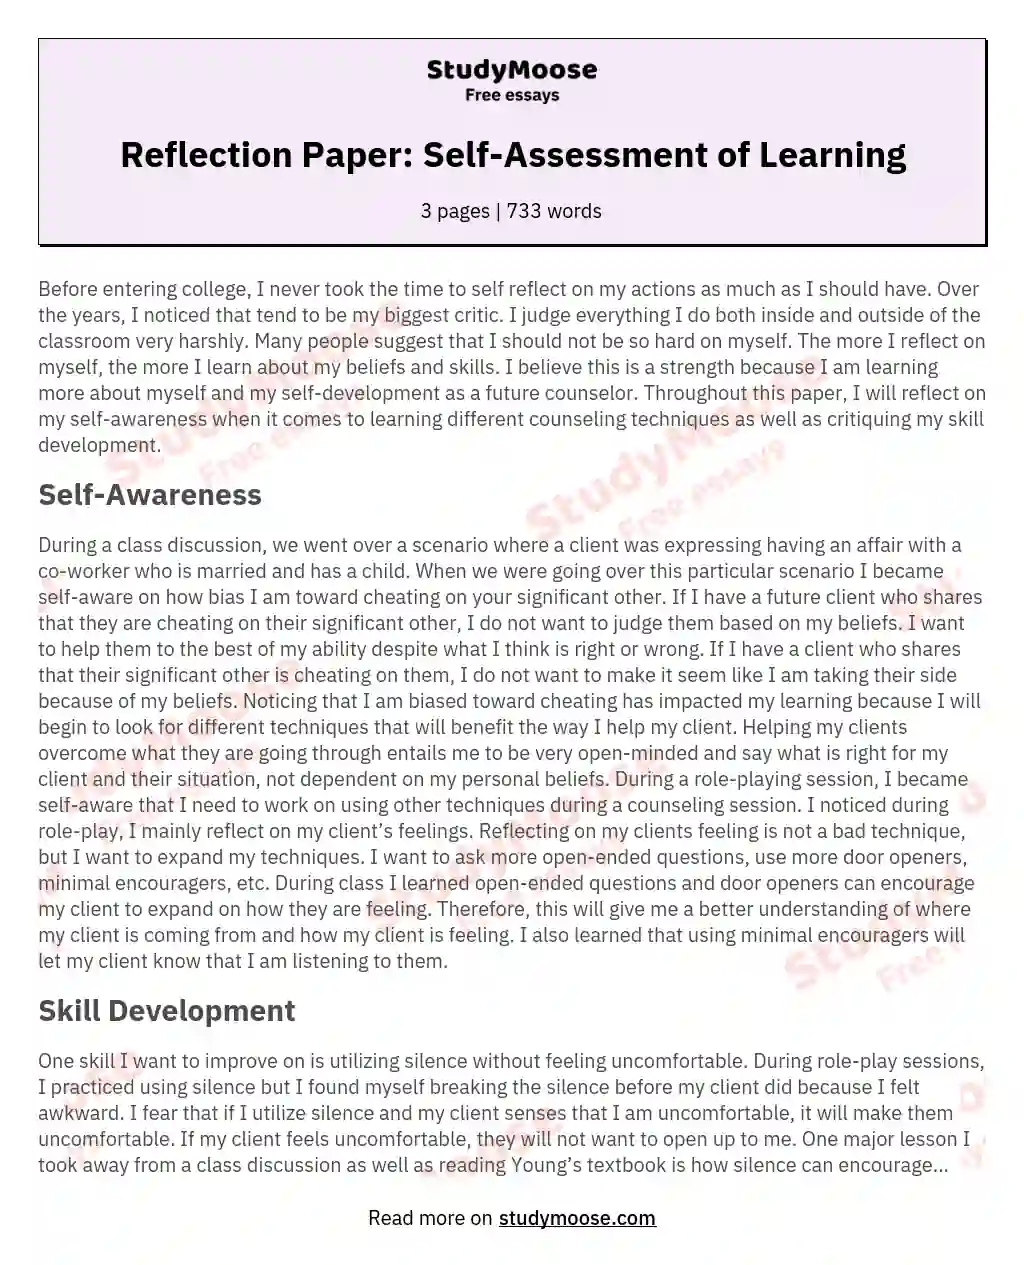 essay test in assessment of learning